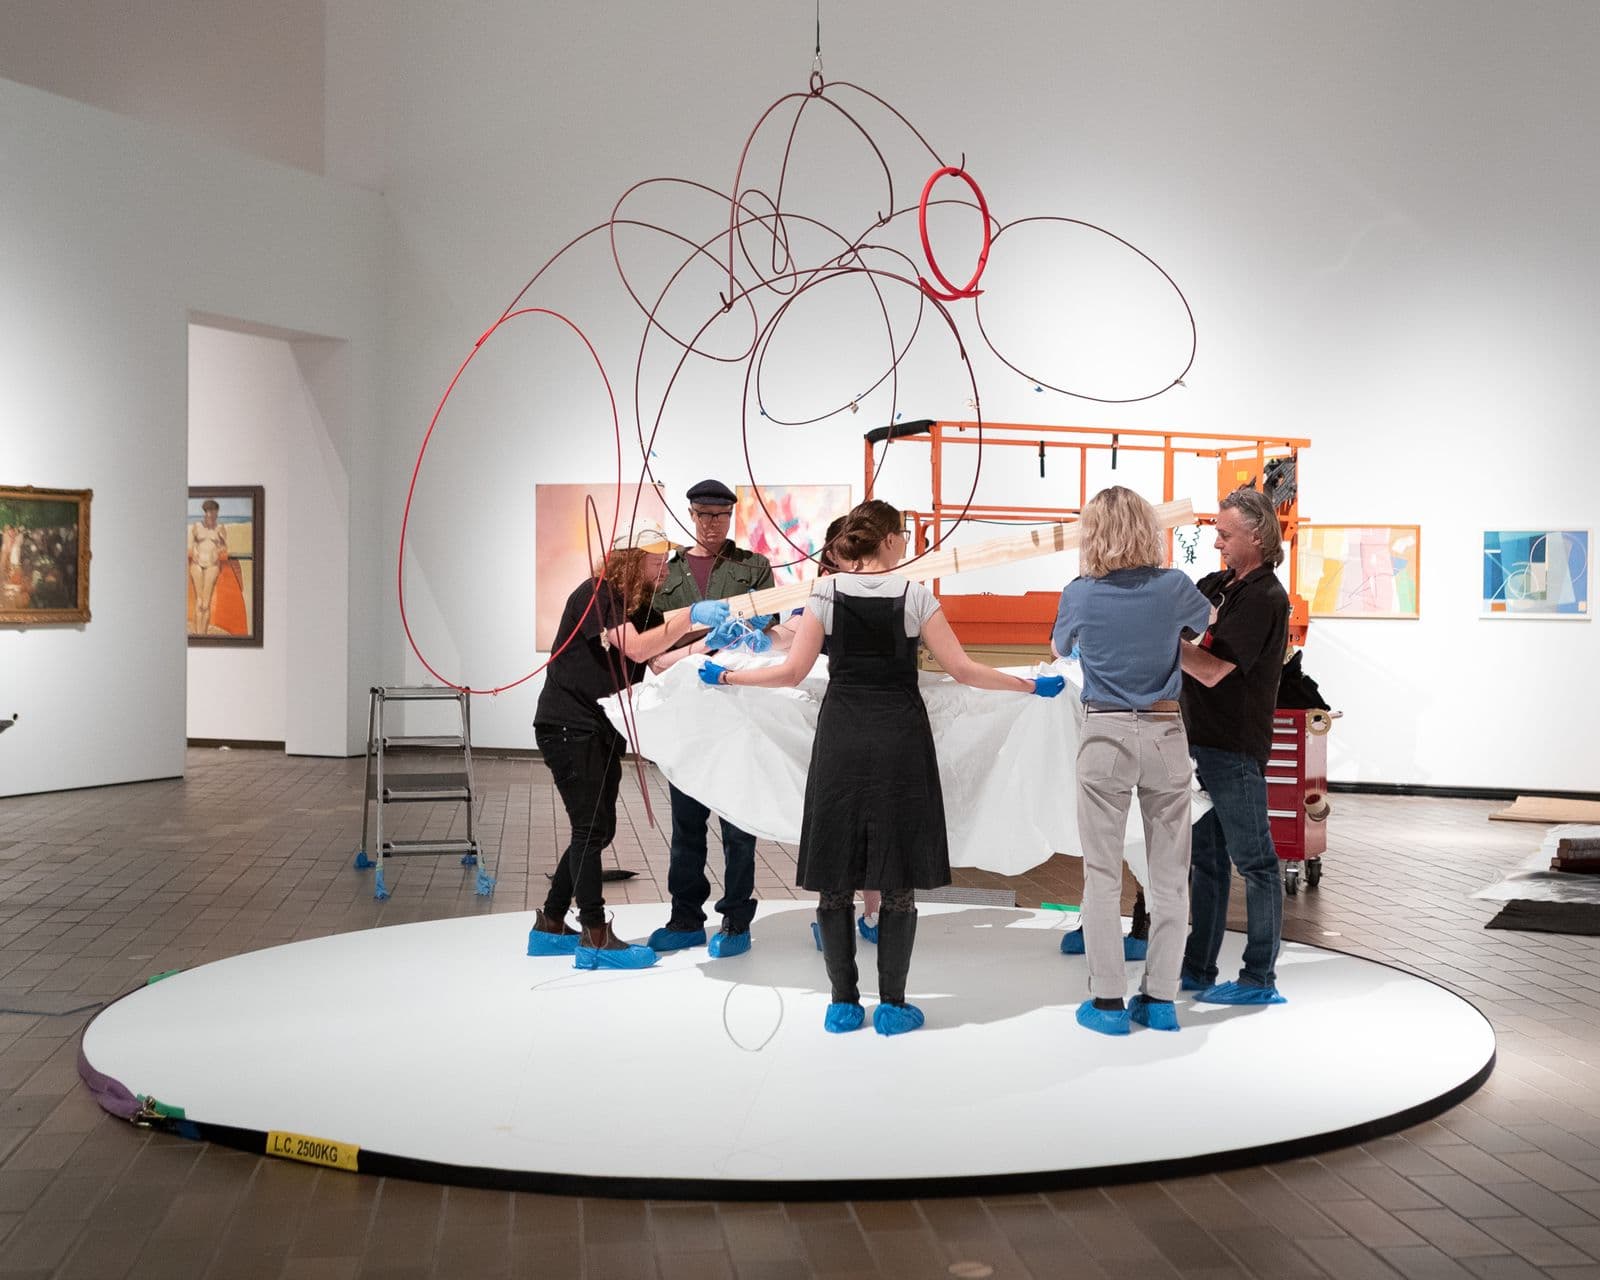 A group of five people in the centre of a gallery space hold a large sheet as they install a large hanging mobile from the ceiling